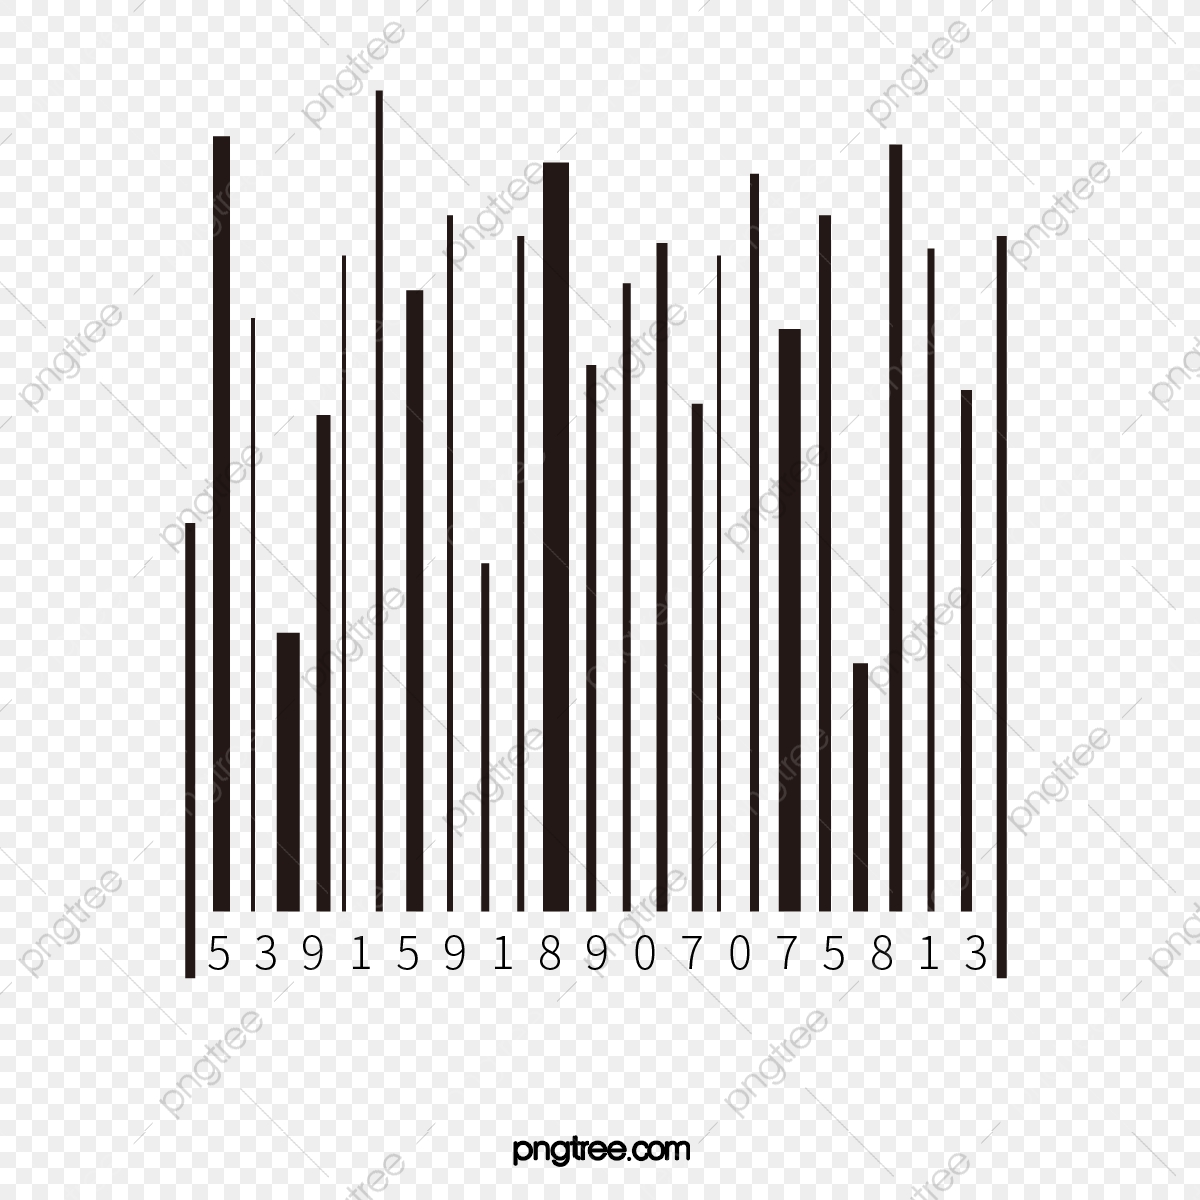 Free barcode font for excel